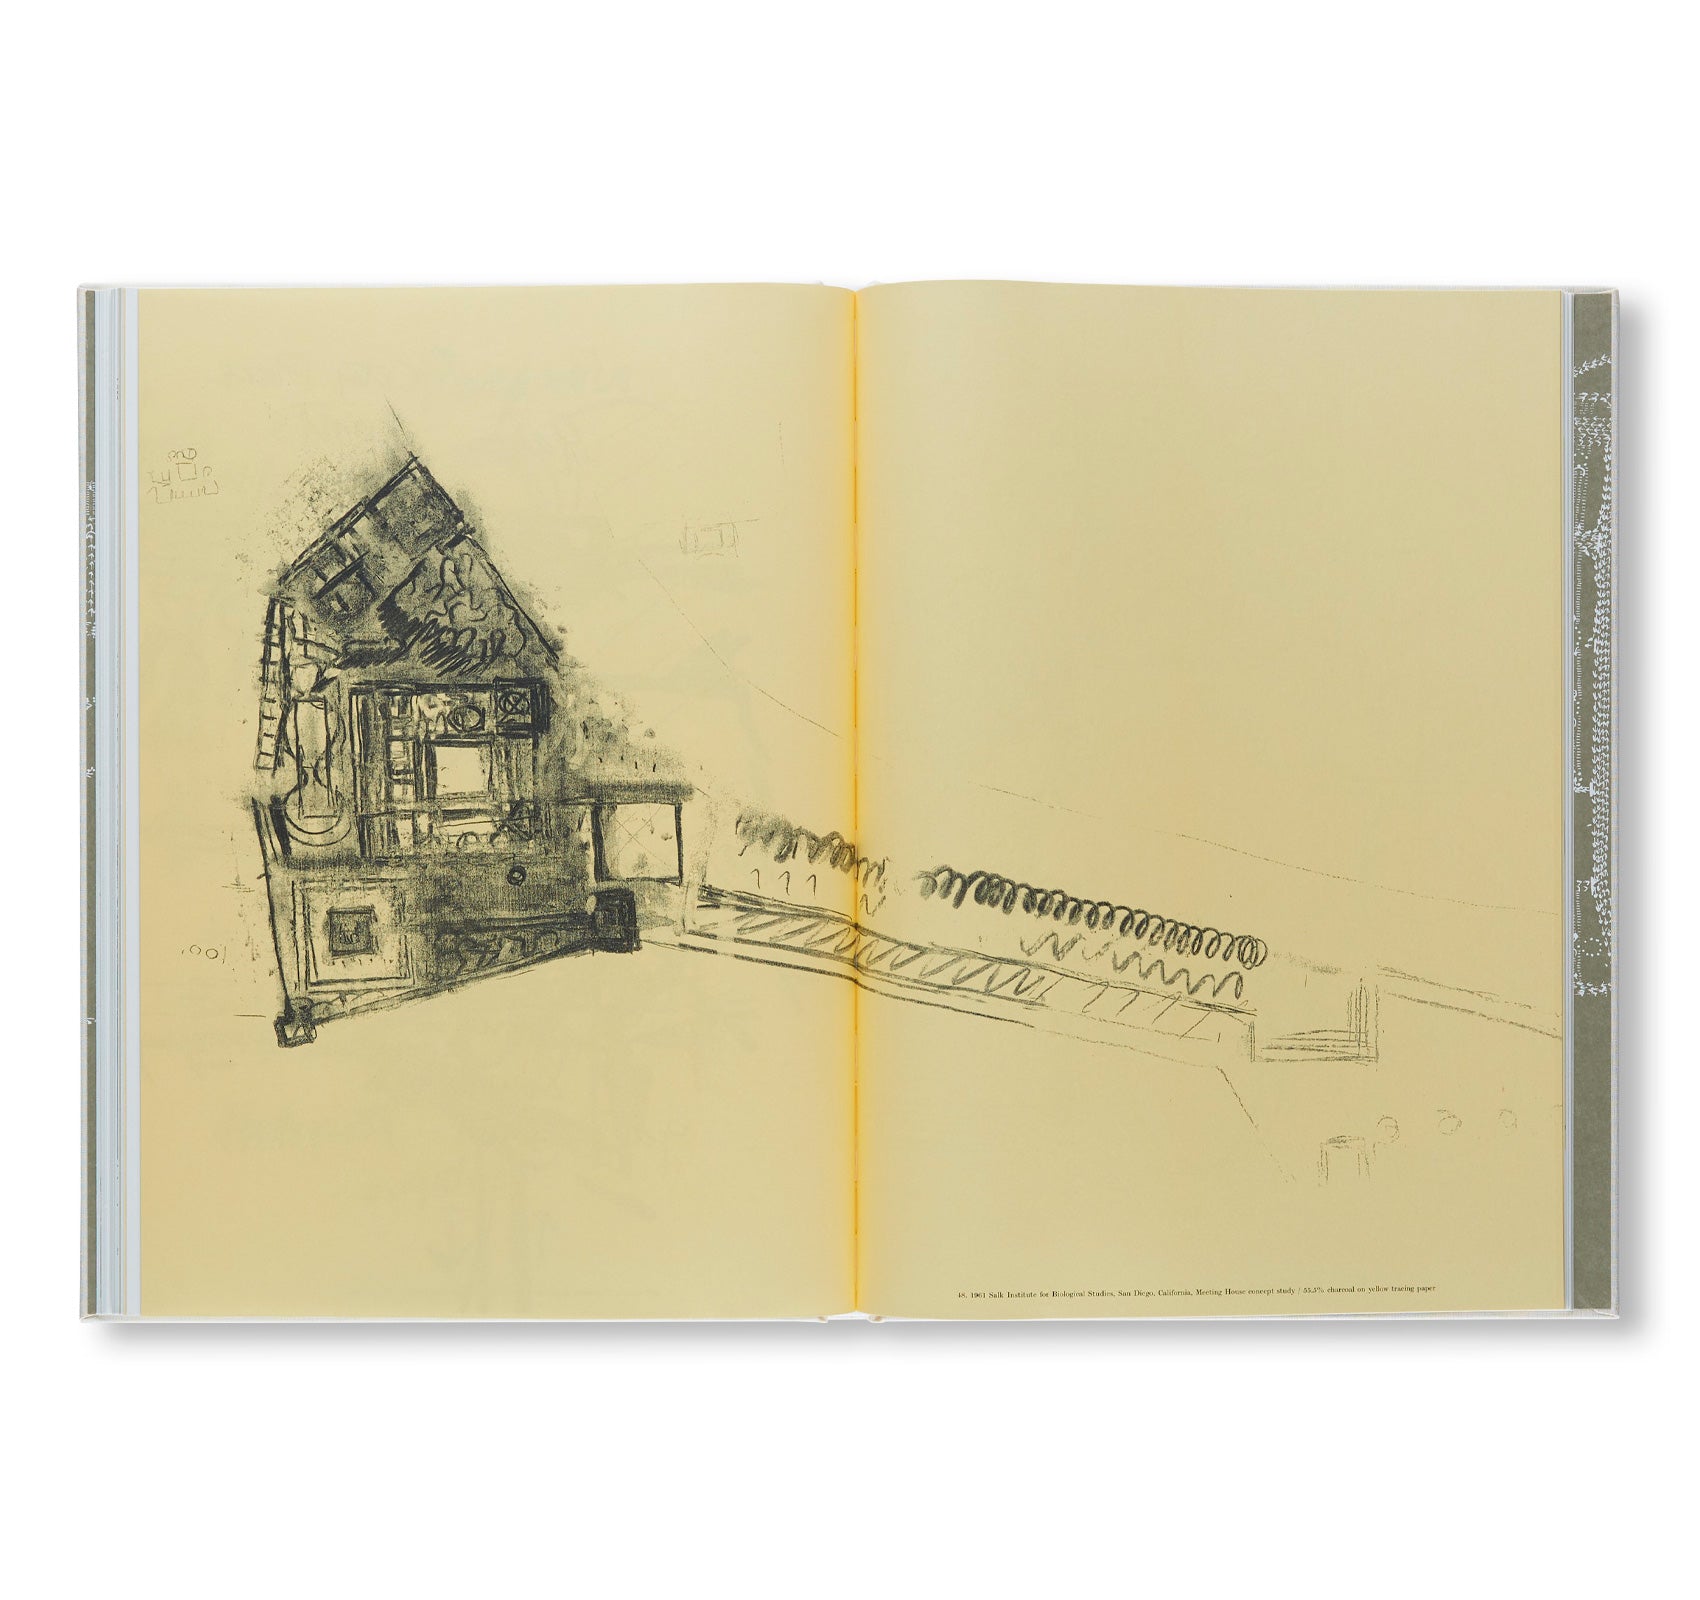 THE NOTEBOOKS AND DRAWINGS OF LOUIS I. KAHN by Louis I. Kahn